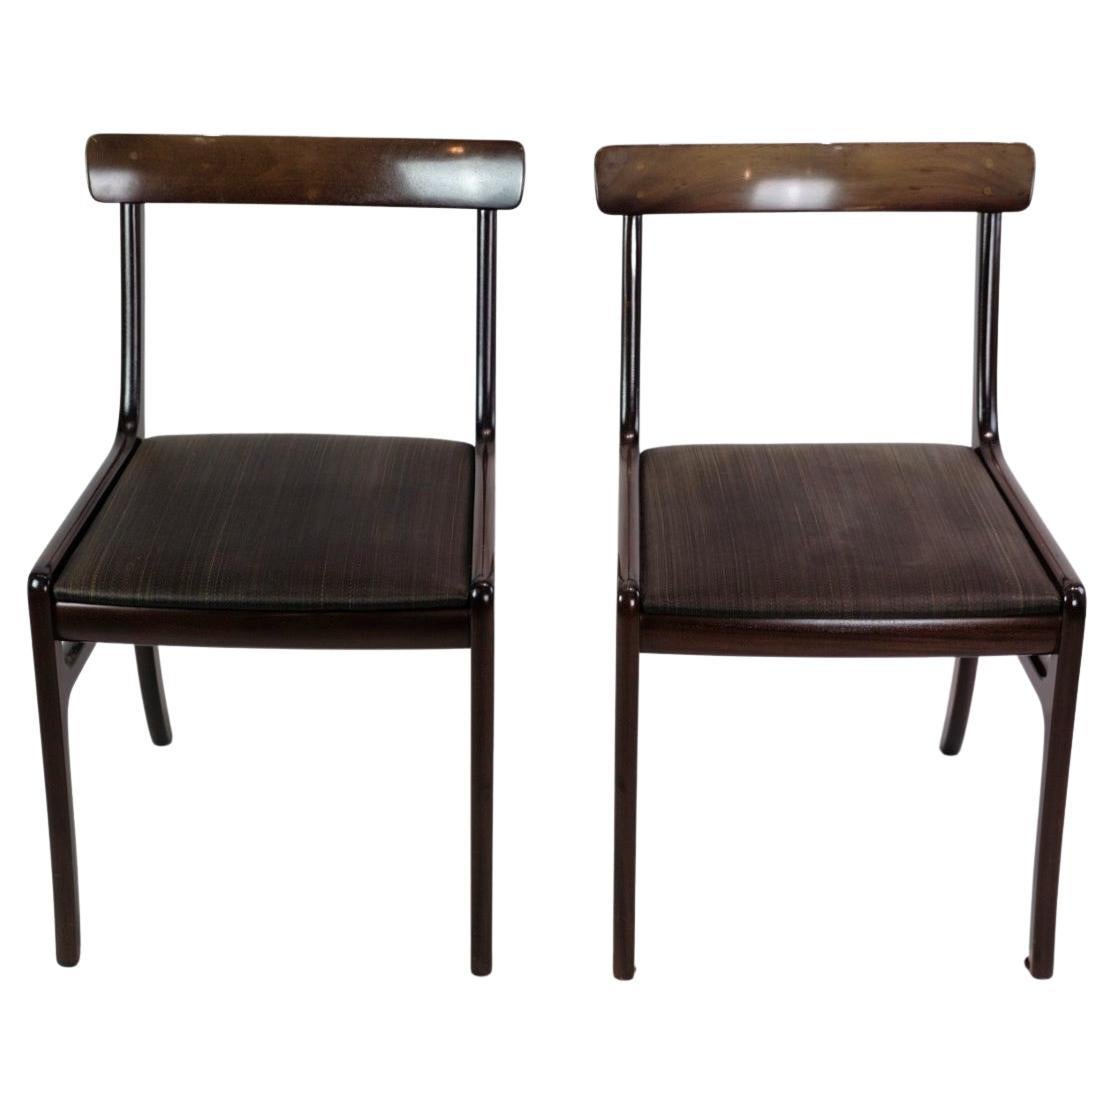 Set of Two Rungstedlund Chairs Made In Mahogany by Ole Wancher From 1960s For Sale